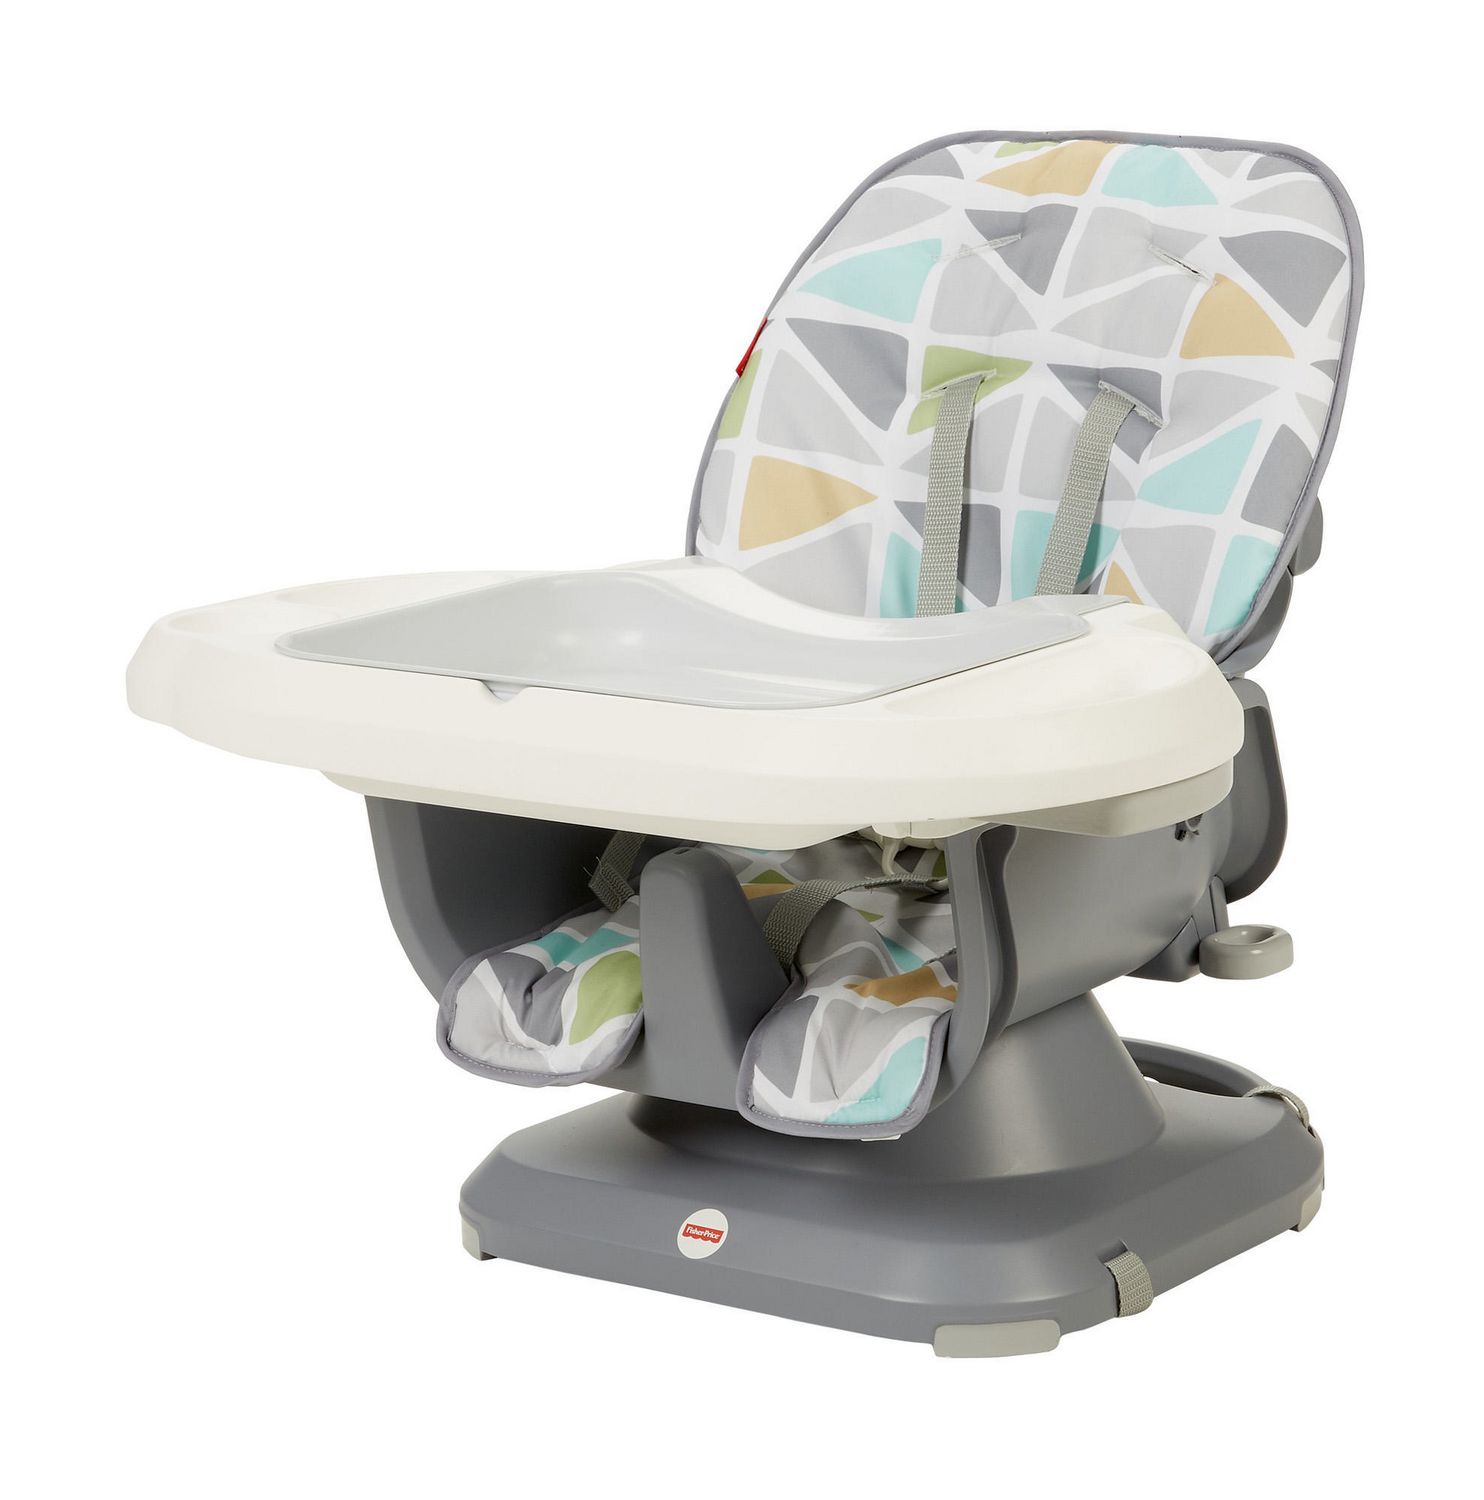 fisher price space saver high chair geo circles